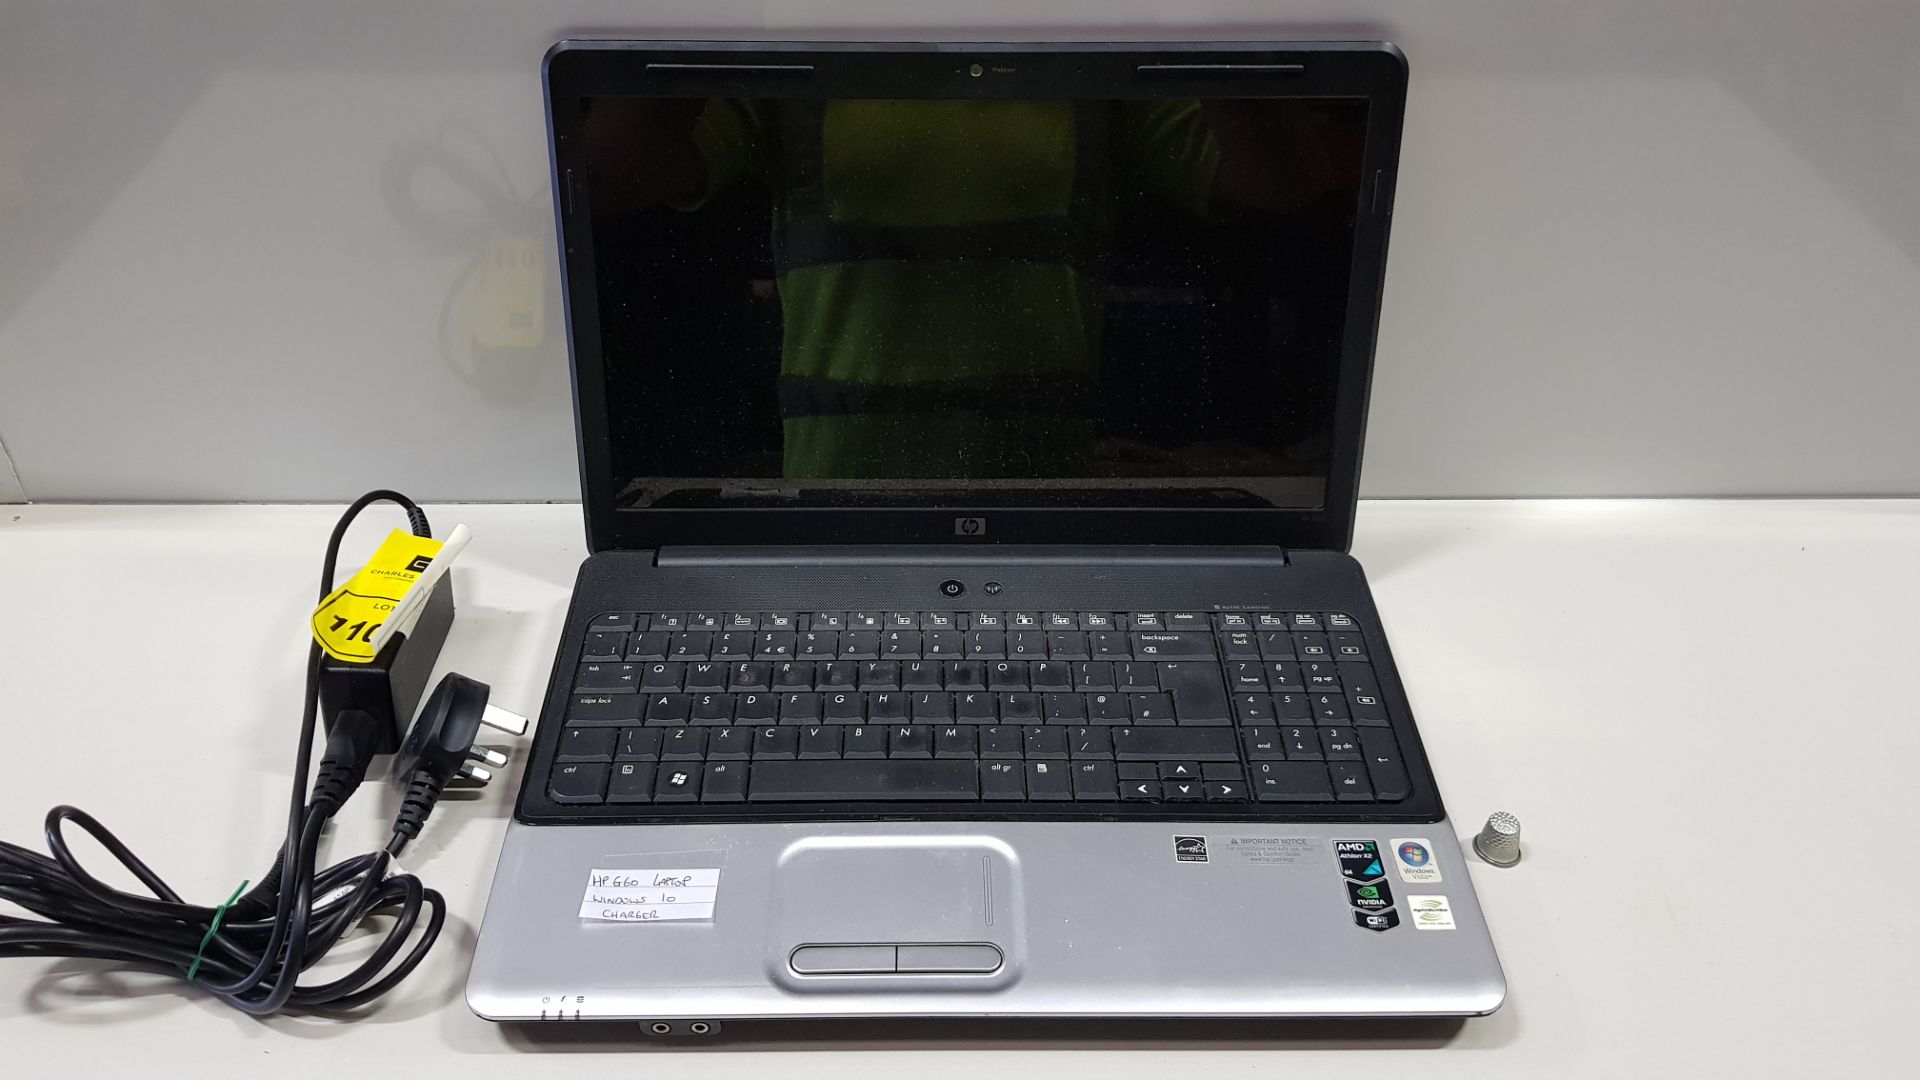 HP G60 LAPTOP WINDOWS 10 - WITH CHARGER